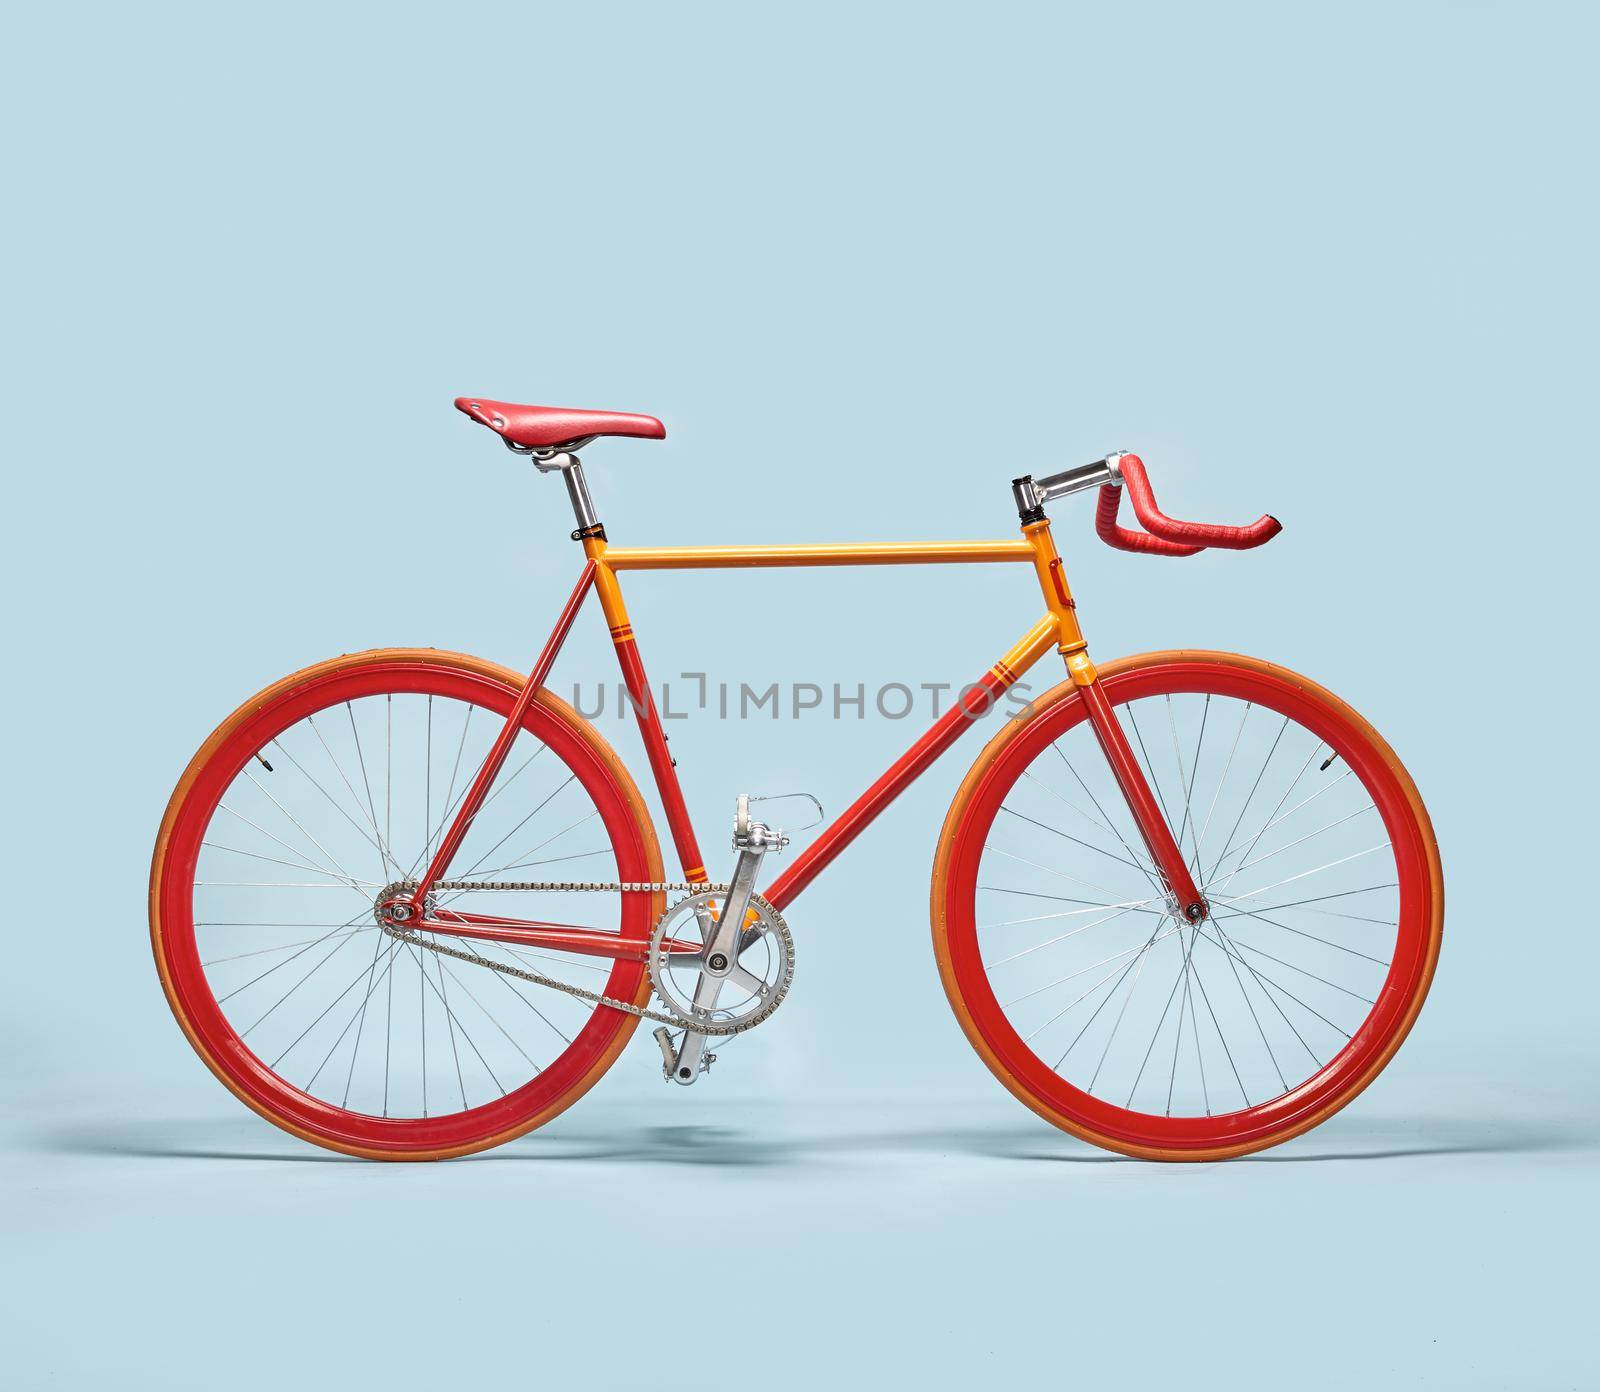 Trendy orange and red bicycle by Xebeche2